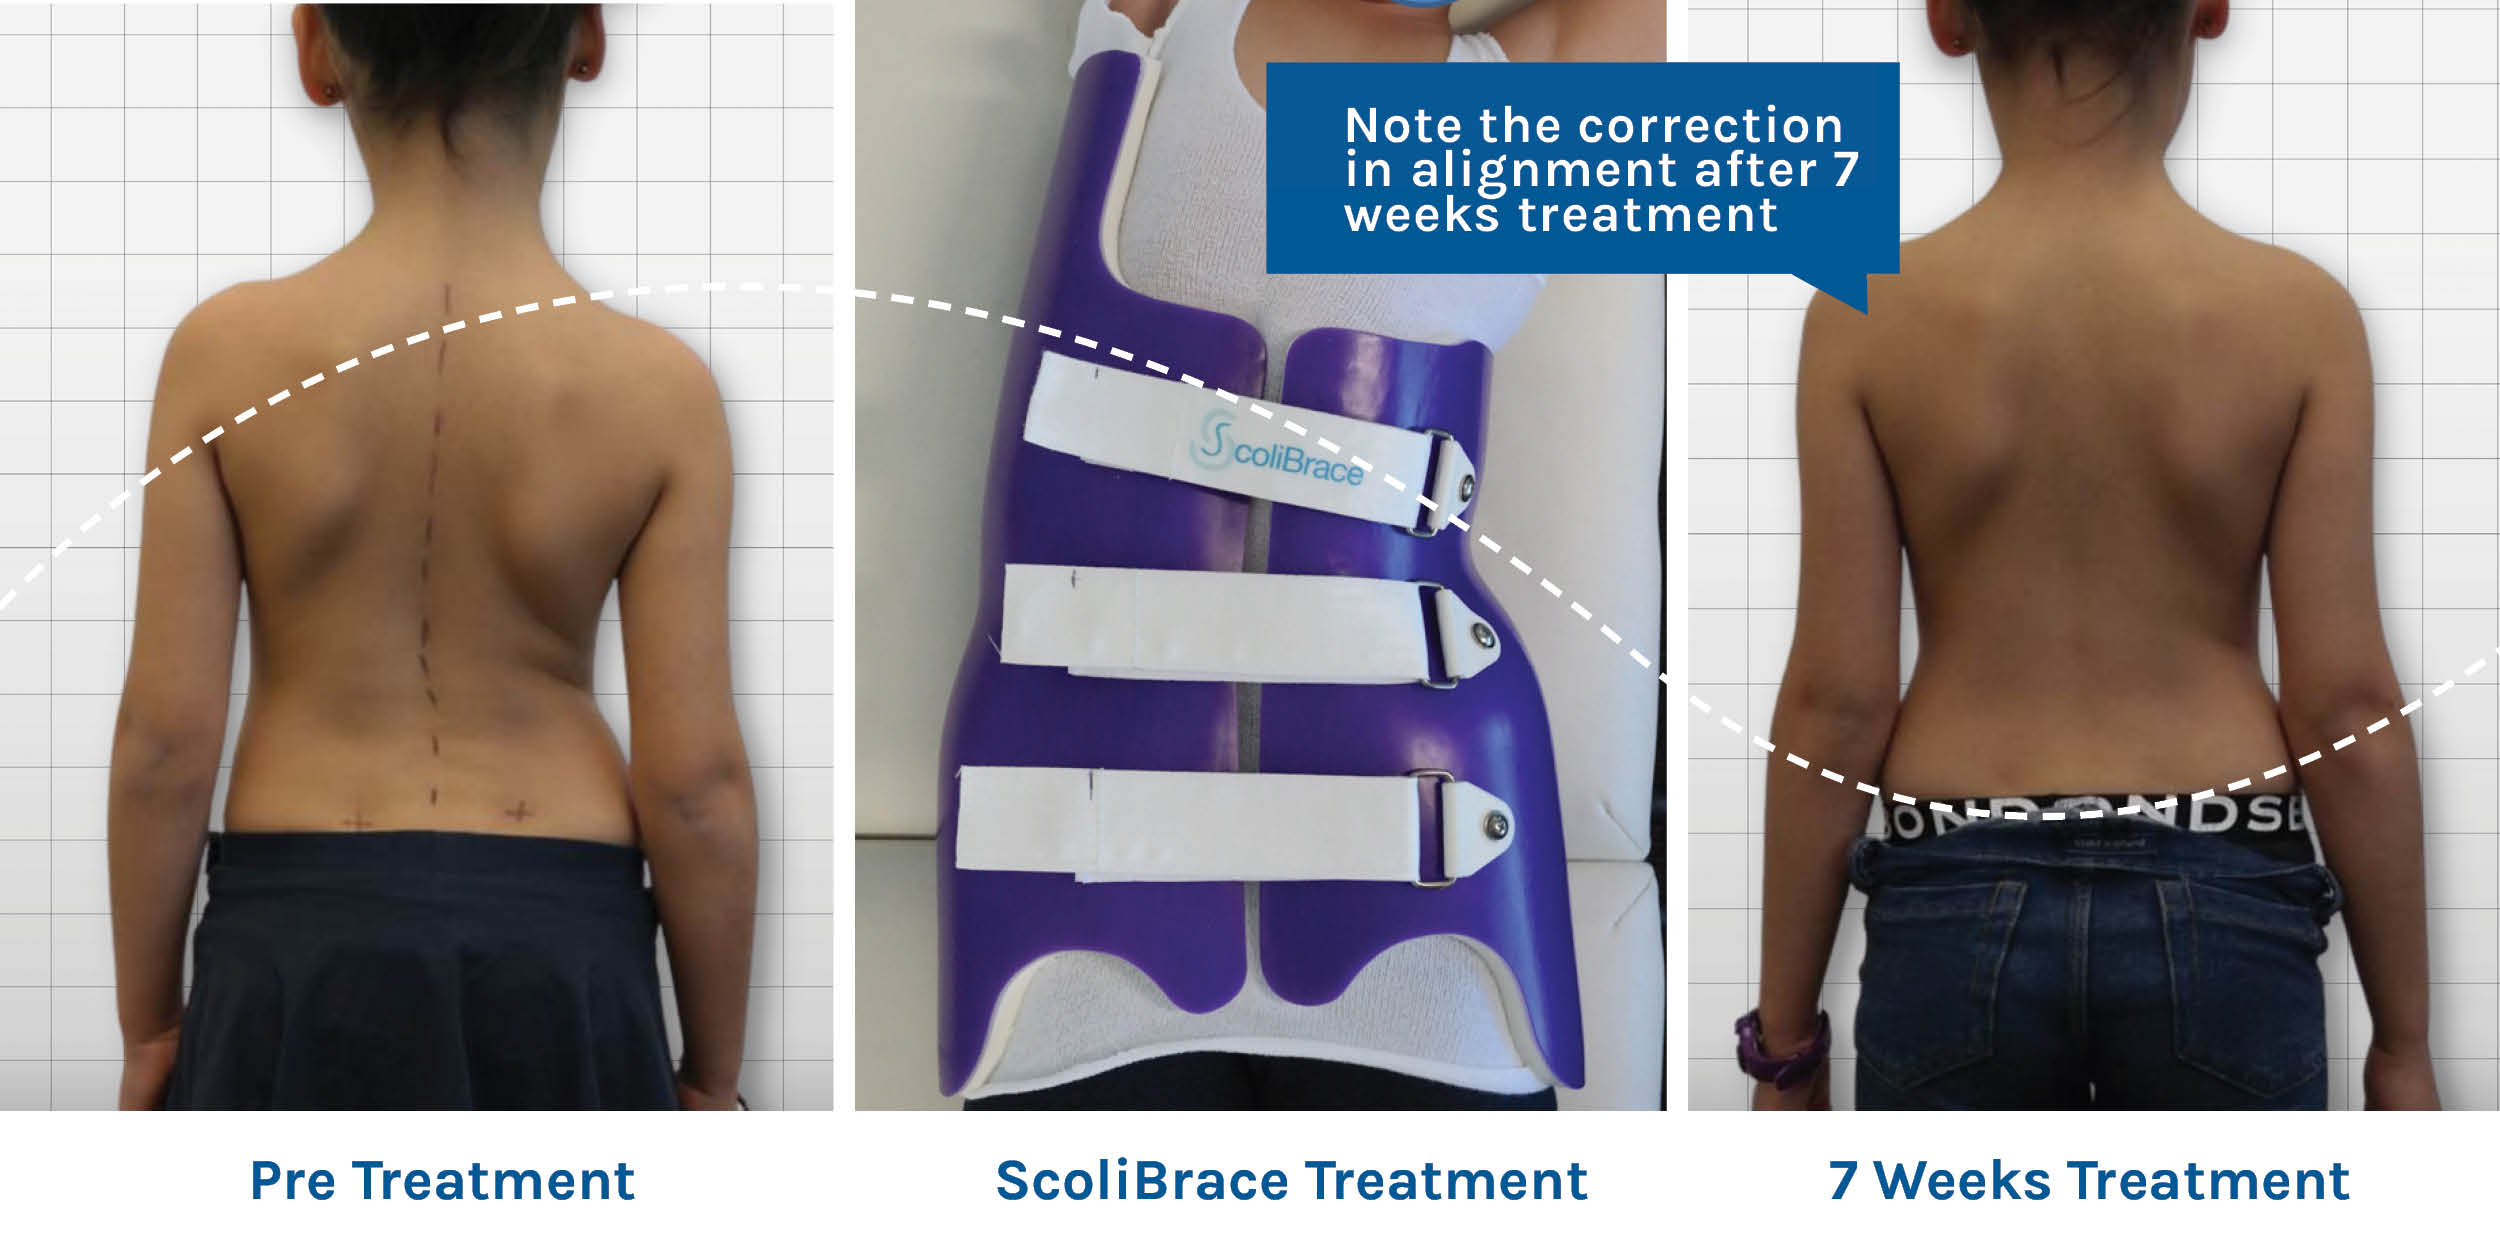 ScoliNight truly 3D custom made hyper-corrective brace designed specifically for night time wear